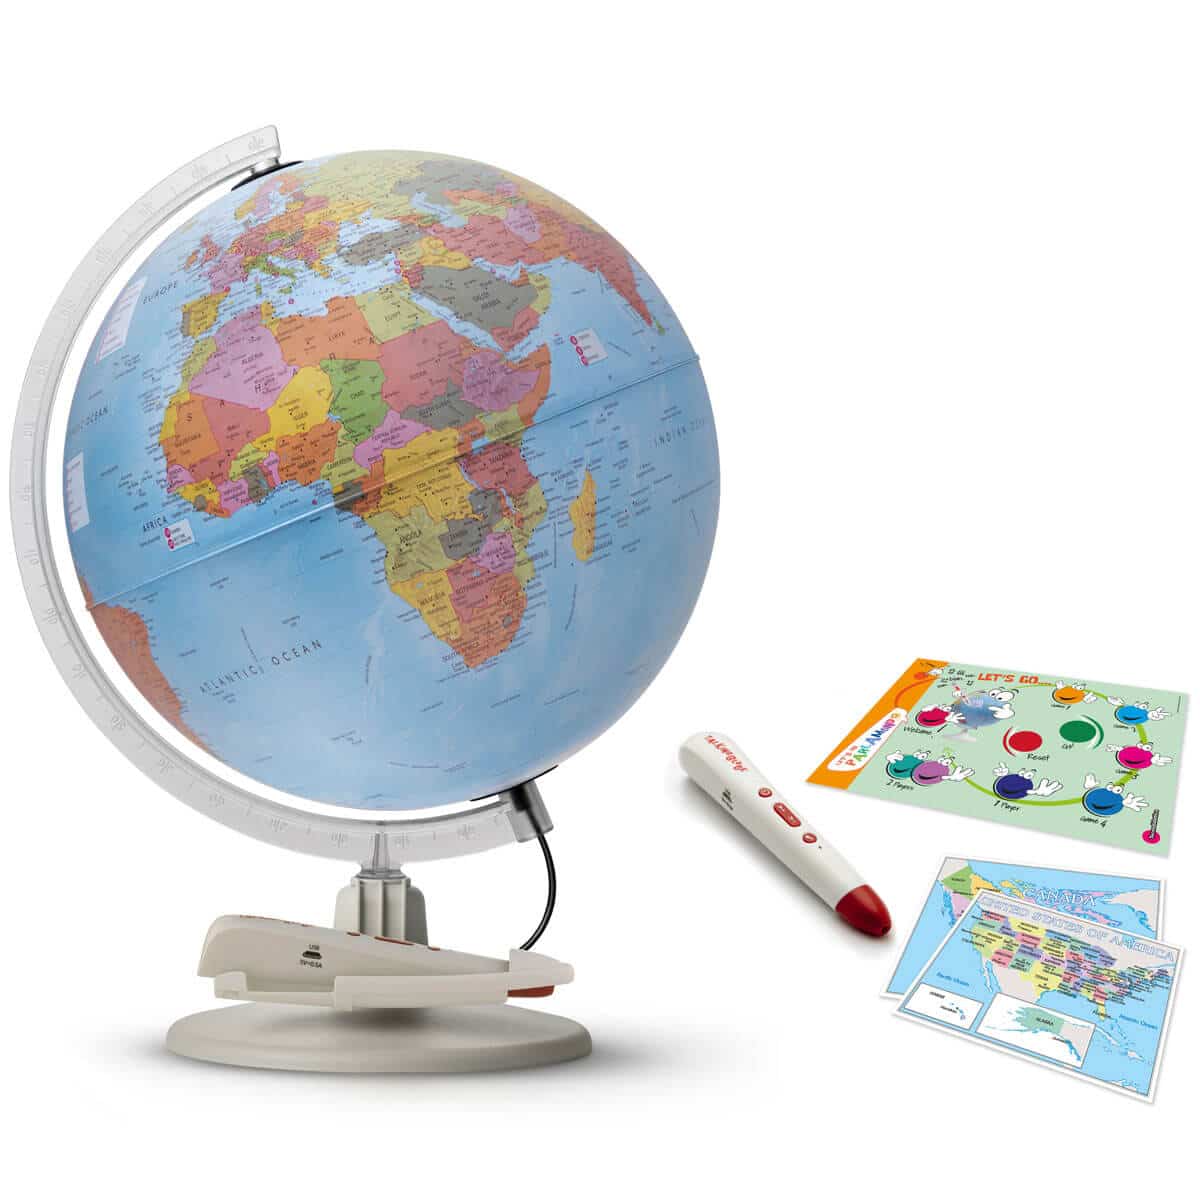  Waypoint Geographic Parlamondo Interactive Talking Globe, 12  Diameter Illuminated Globe, Smart World Globe with Games, Rechargeable  Talking Pen, USB Cord and Power Plug Included,Blue : Toys & Games